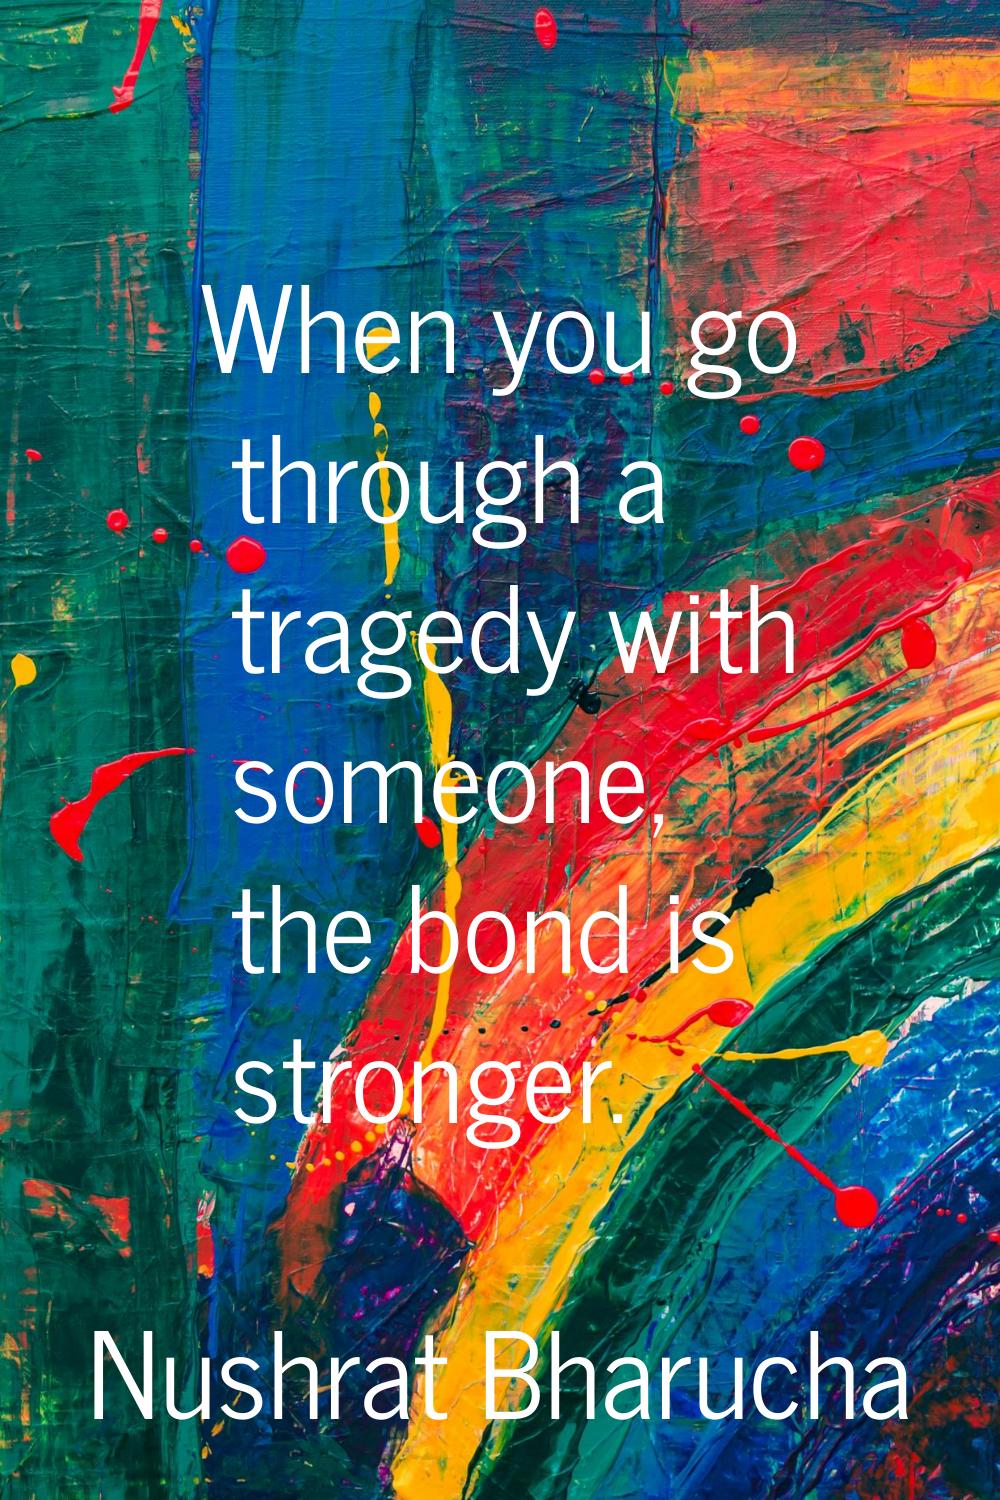 When you go through a tragedy with someone, the bond is stronger.